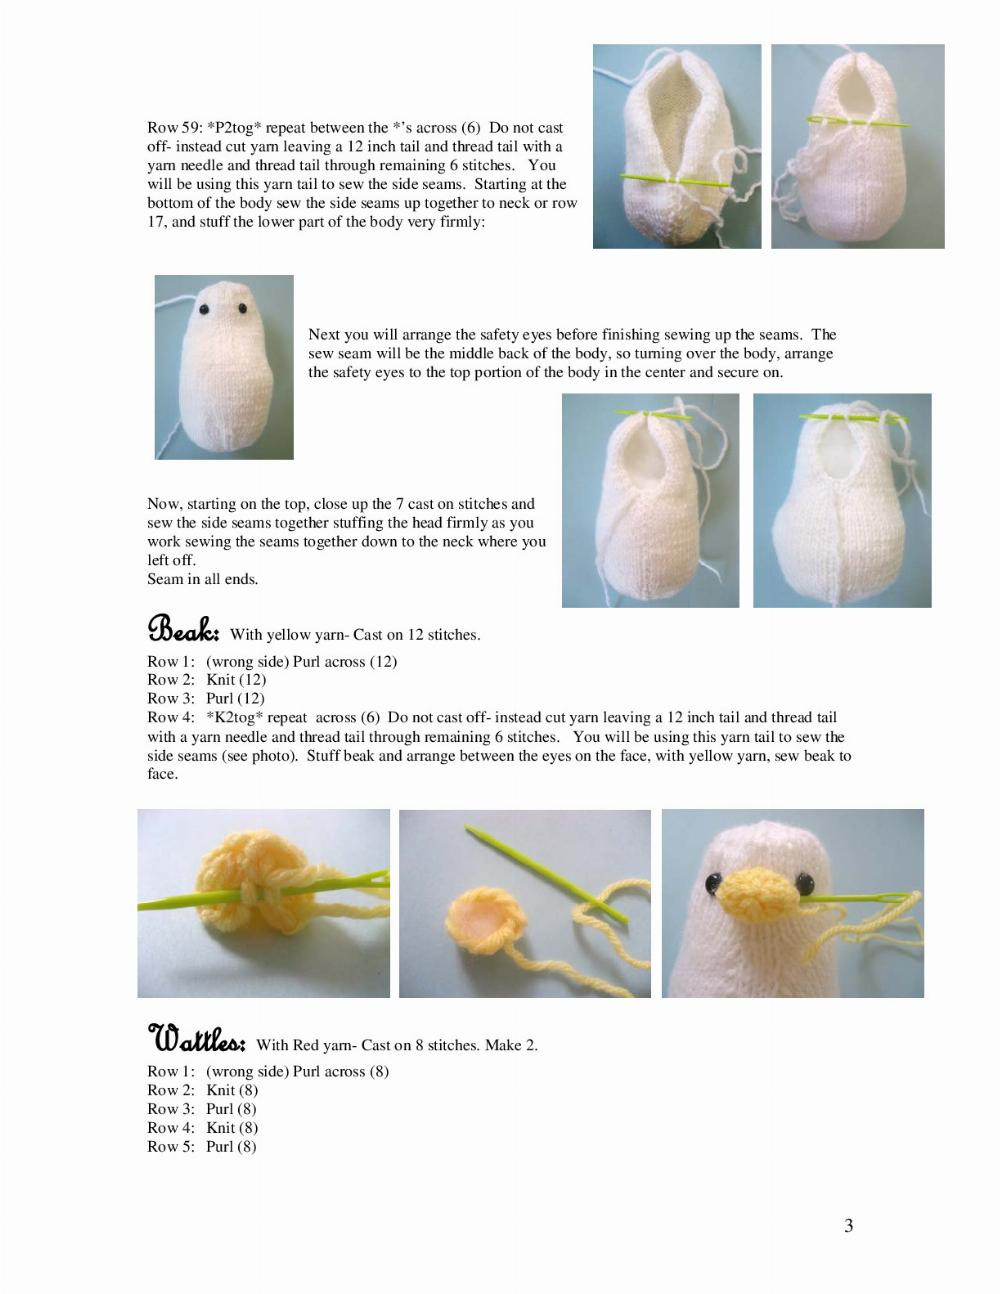 Knit Chicken and Baby Chick Patterns